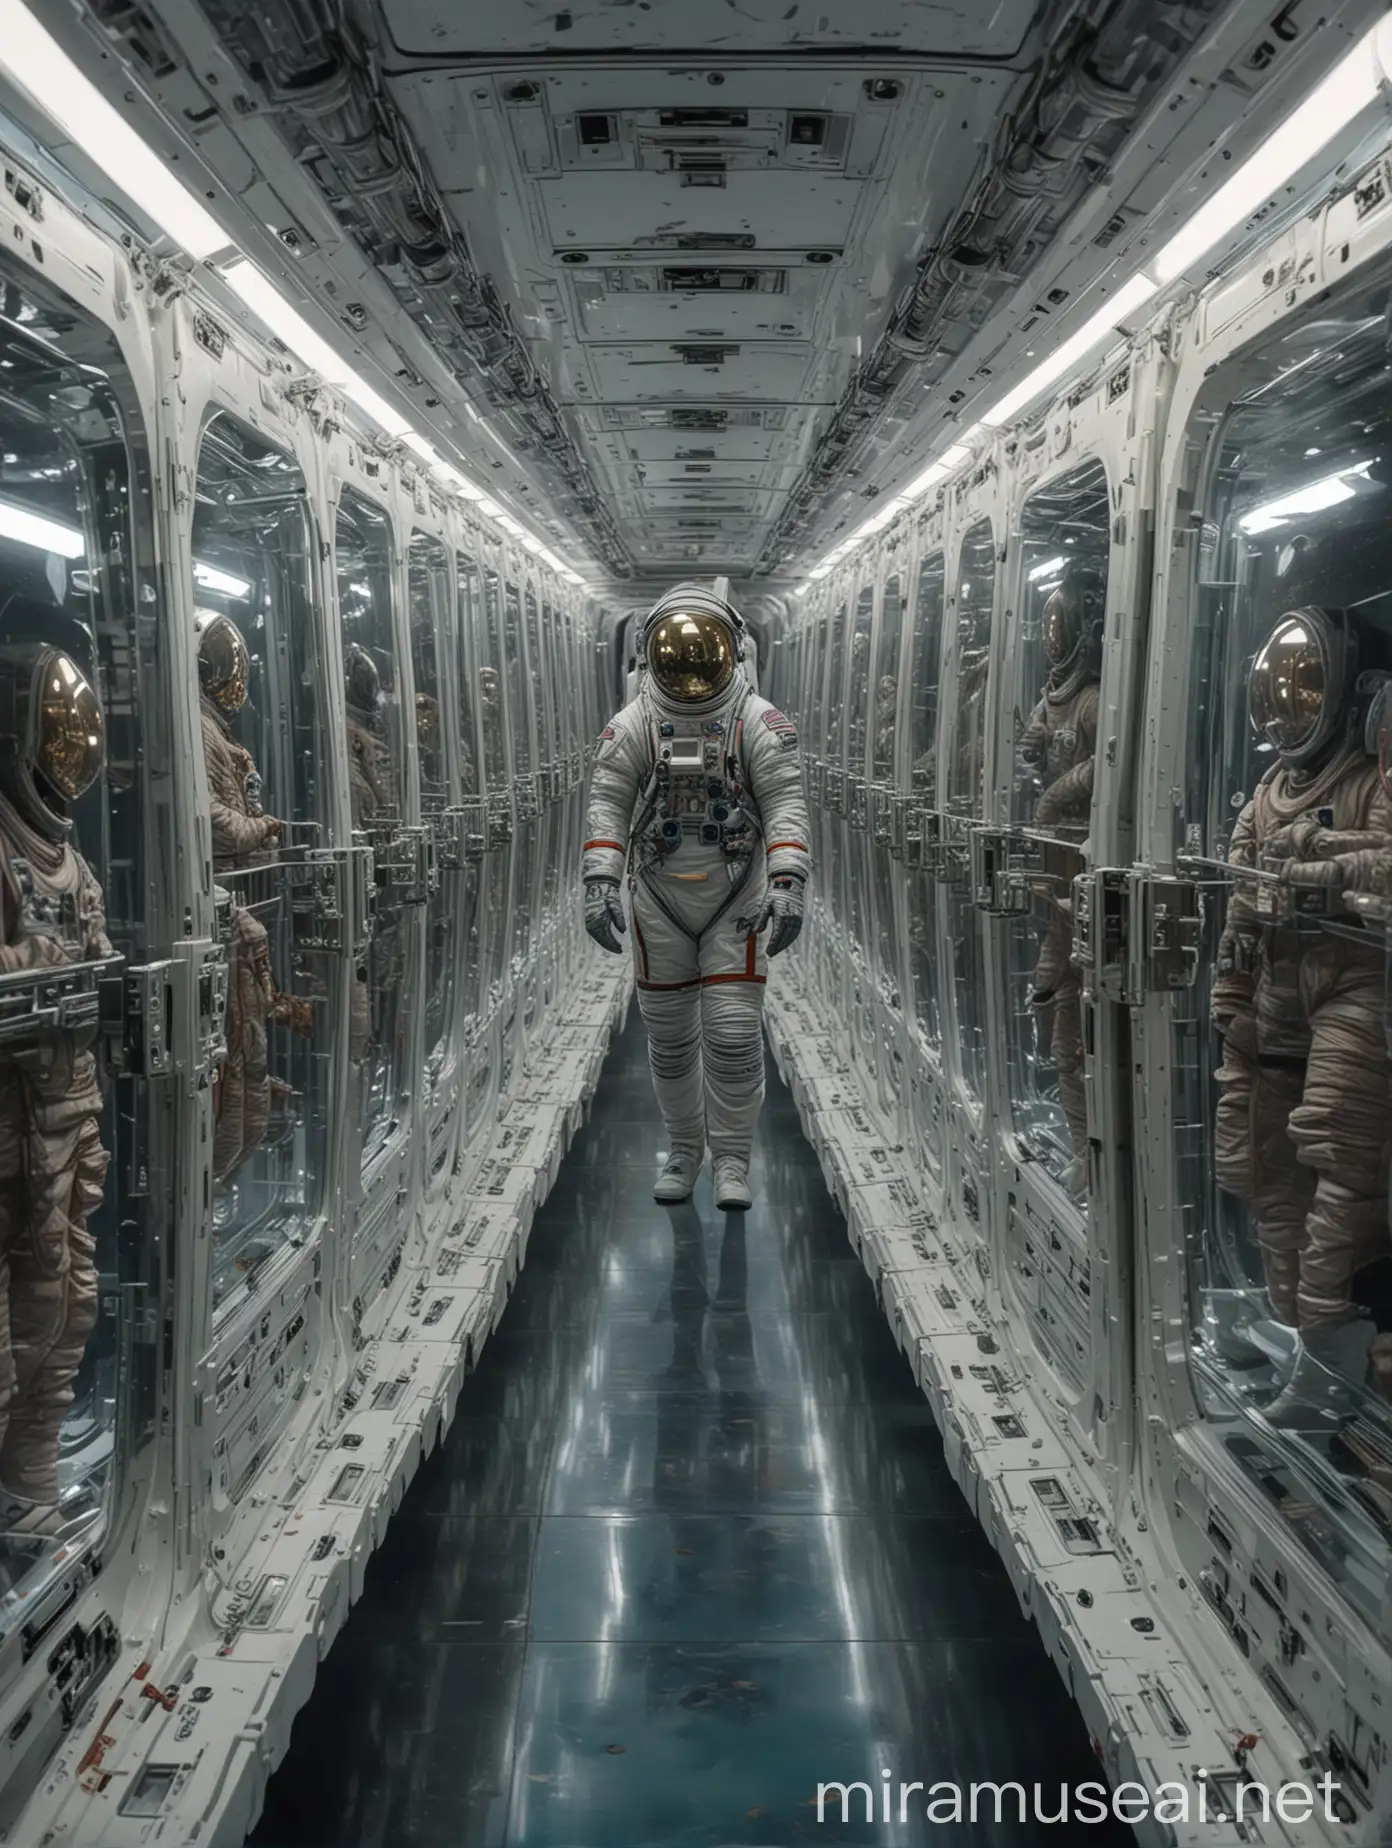 Highly detailed painting, wide view, a spacesuited astronaut inside a large spaceship looks at a row of glass caskets, each casket containing a body in suspended animation, use muted colors only, high quality